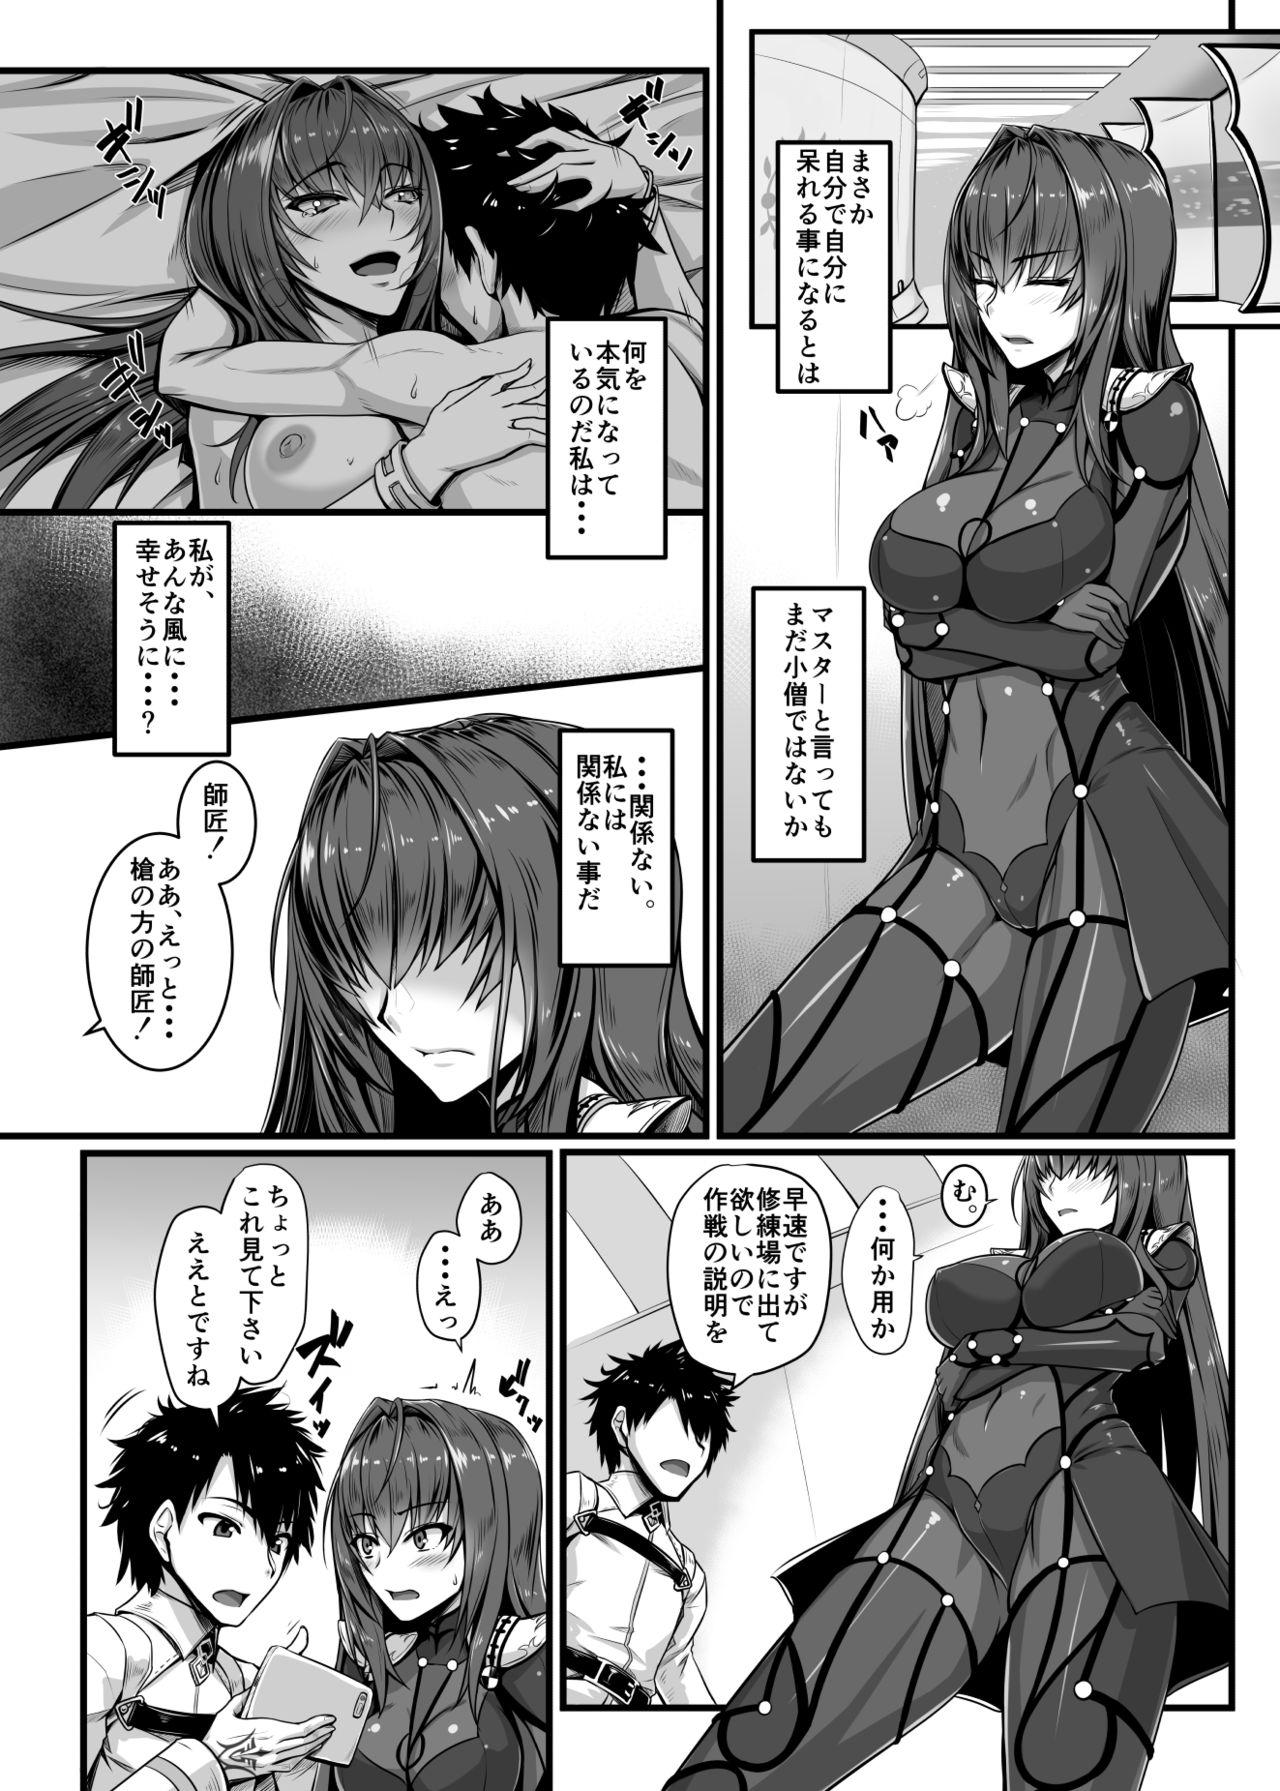 Wet SSWX - Fate grand order Brother - Page 4